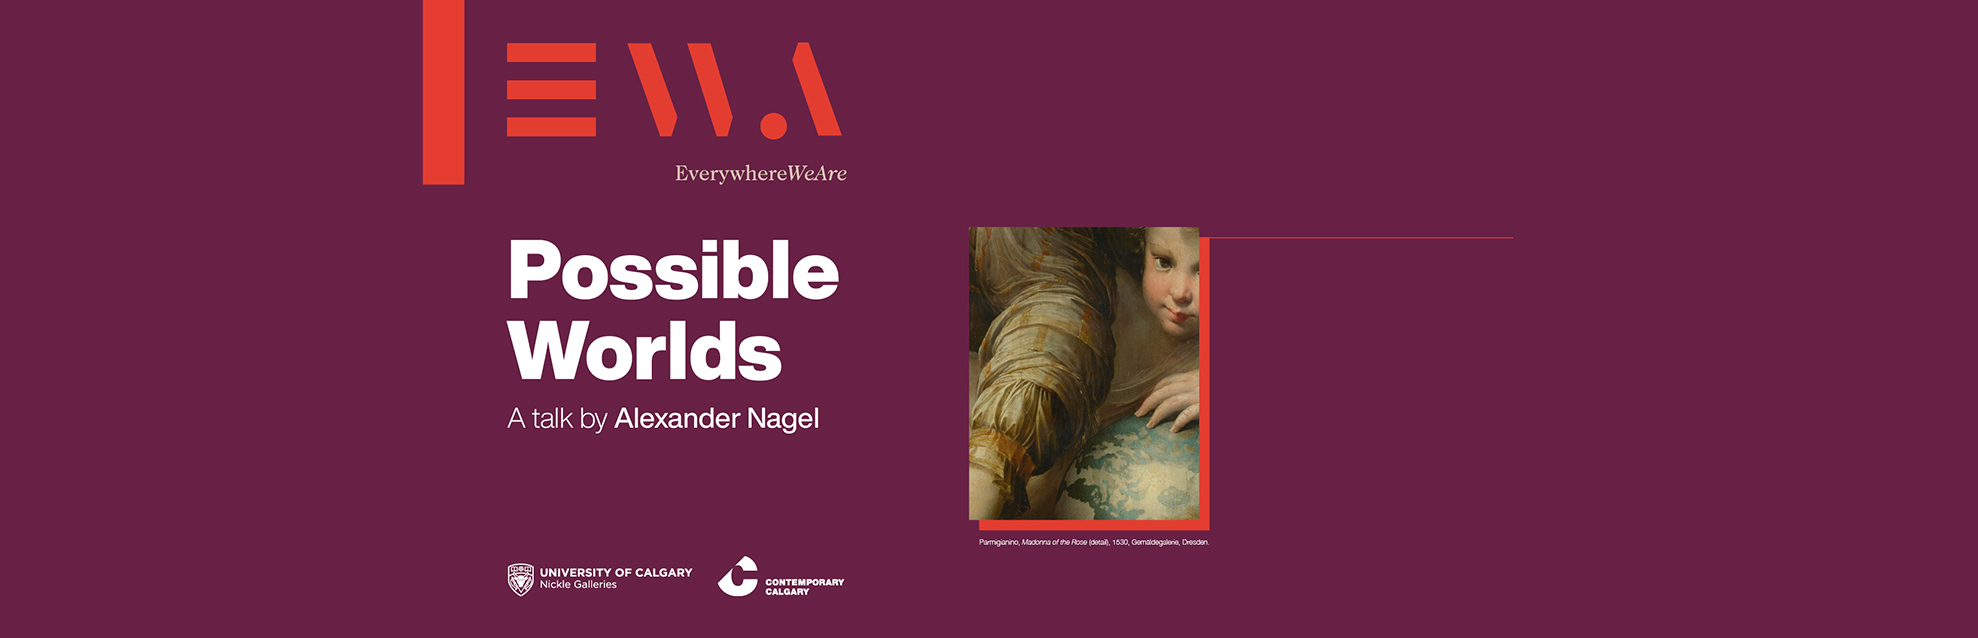 Possible Worlds: A Talk by Alexander Nagel  is now available!